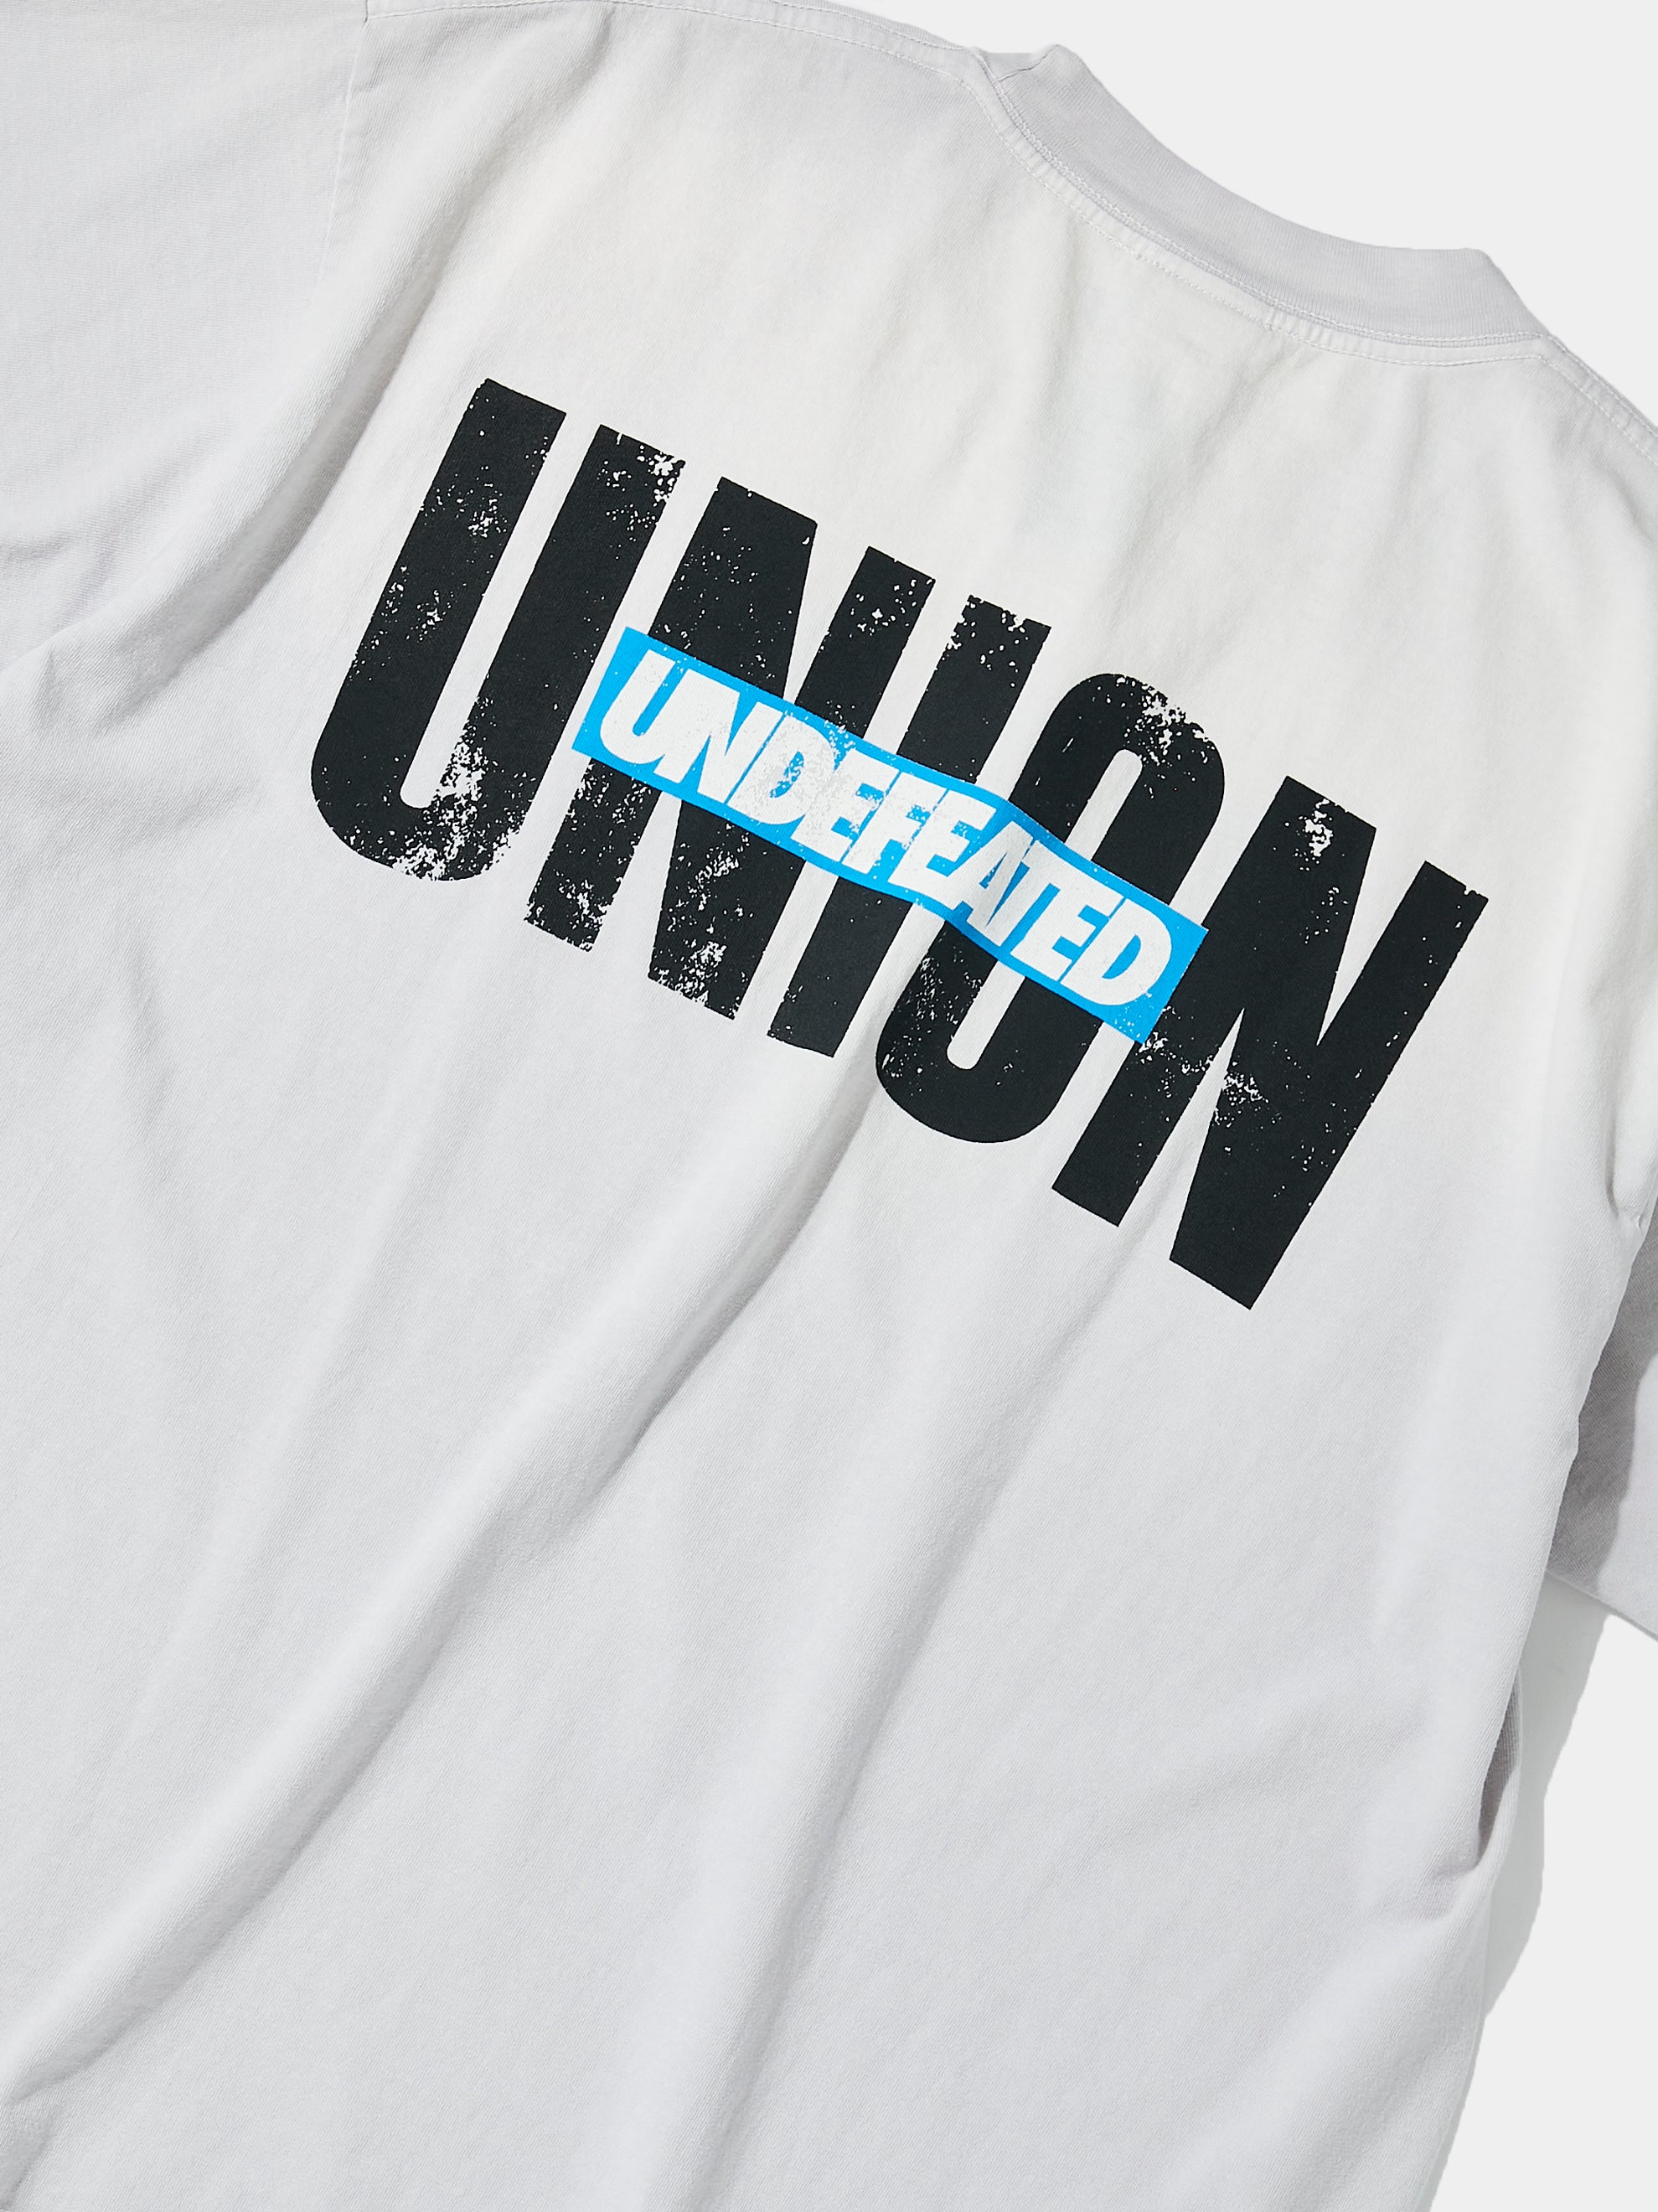 UNDEFEATED x UNION S/S Tee (Faded Lt.Grey)